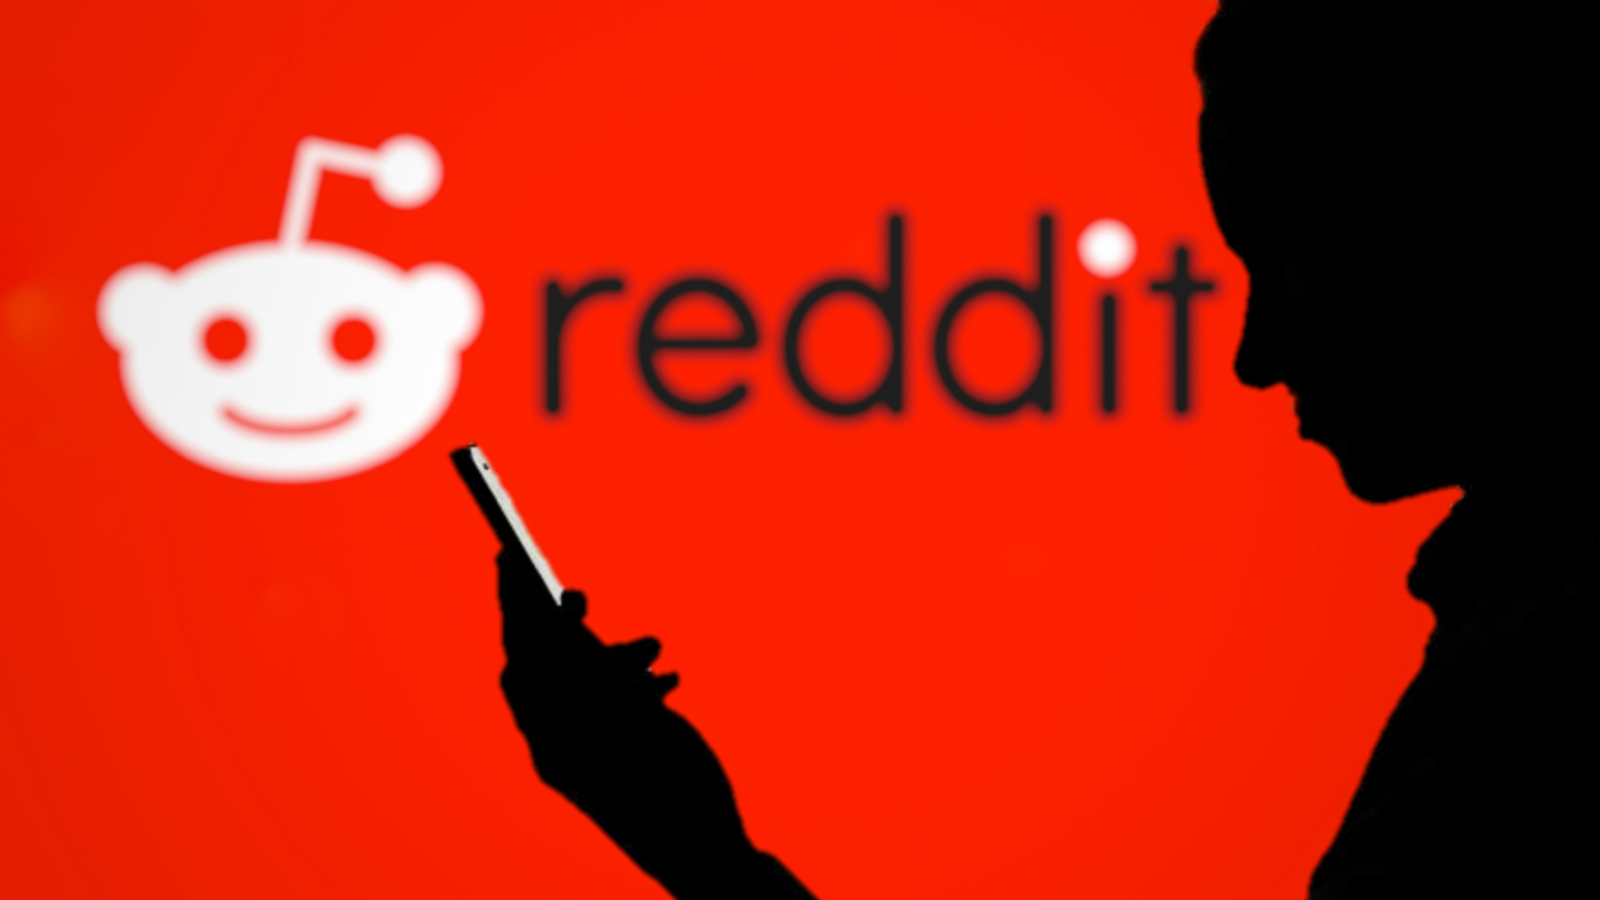 Betting on Reddit Stock: Should You Join the Bulls or Heed the Bears' Warning?